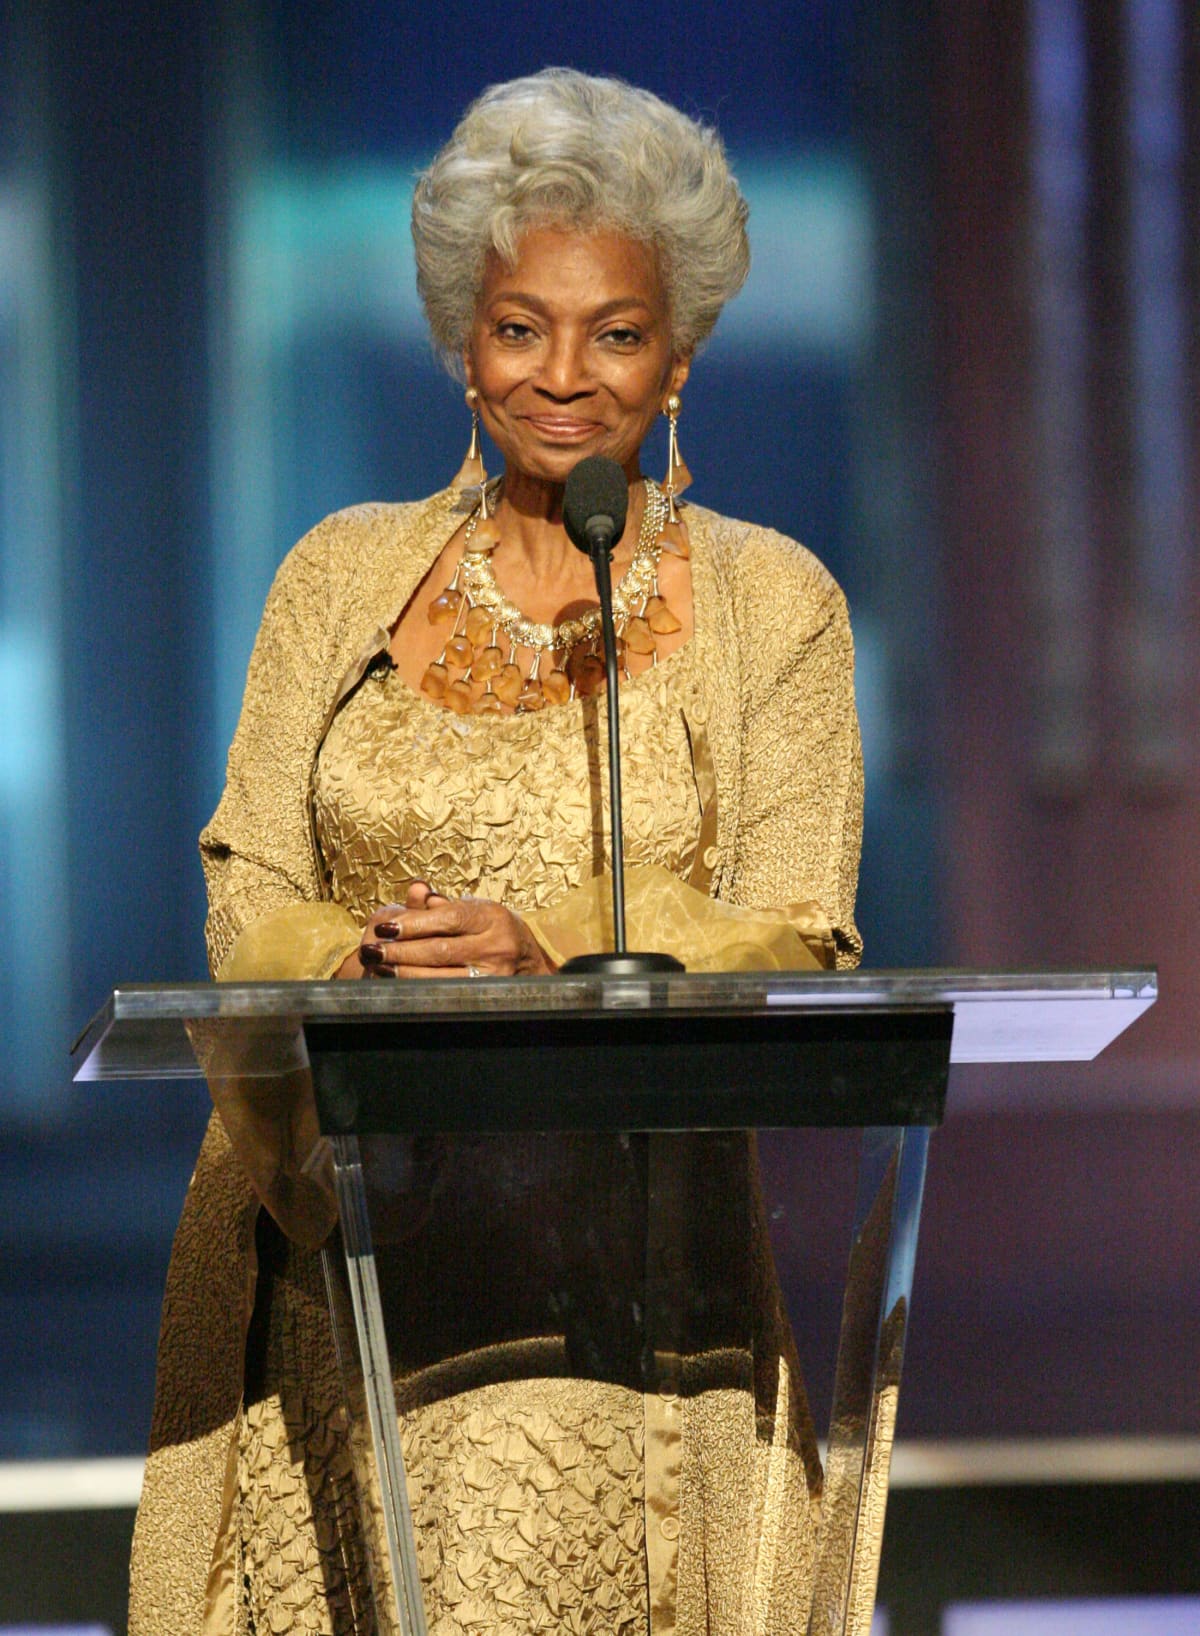 LOS ANGELES, CA - JUNE 09:  Actress Nichelle Nichols attends the Vintage Hollywood Wine & Food tasting benefiting The People Concern on June 9, 2018 in Los Angeles, California.  (Photo by Tiffany Rose/Getty Images for The People Concern )